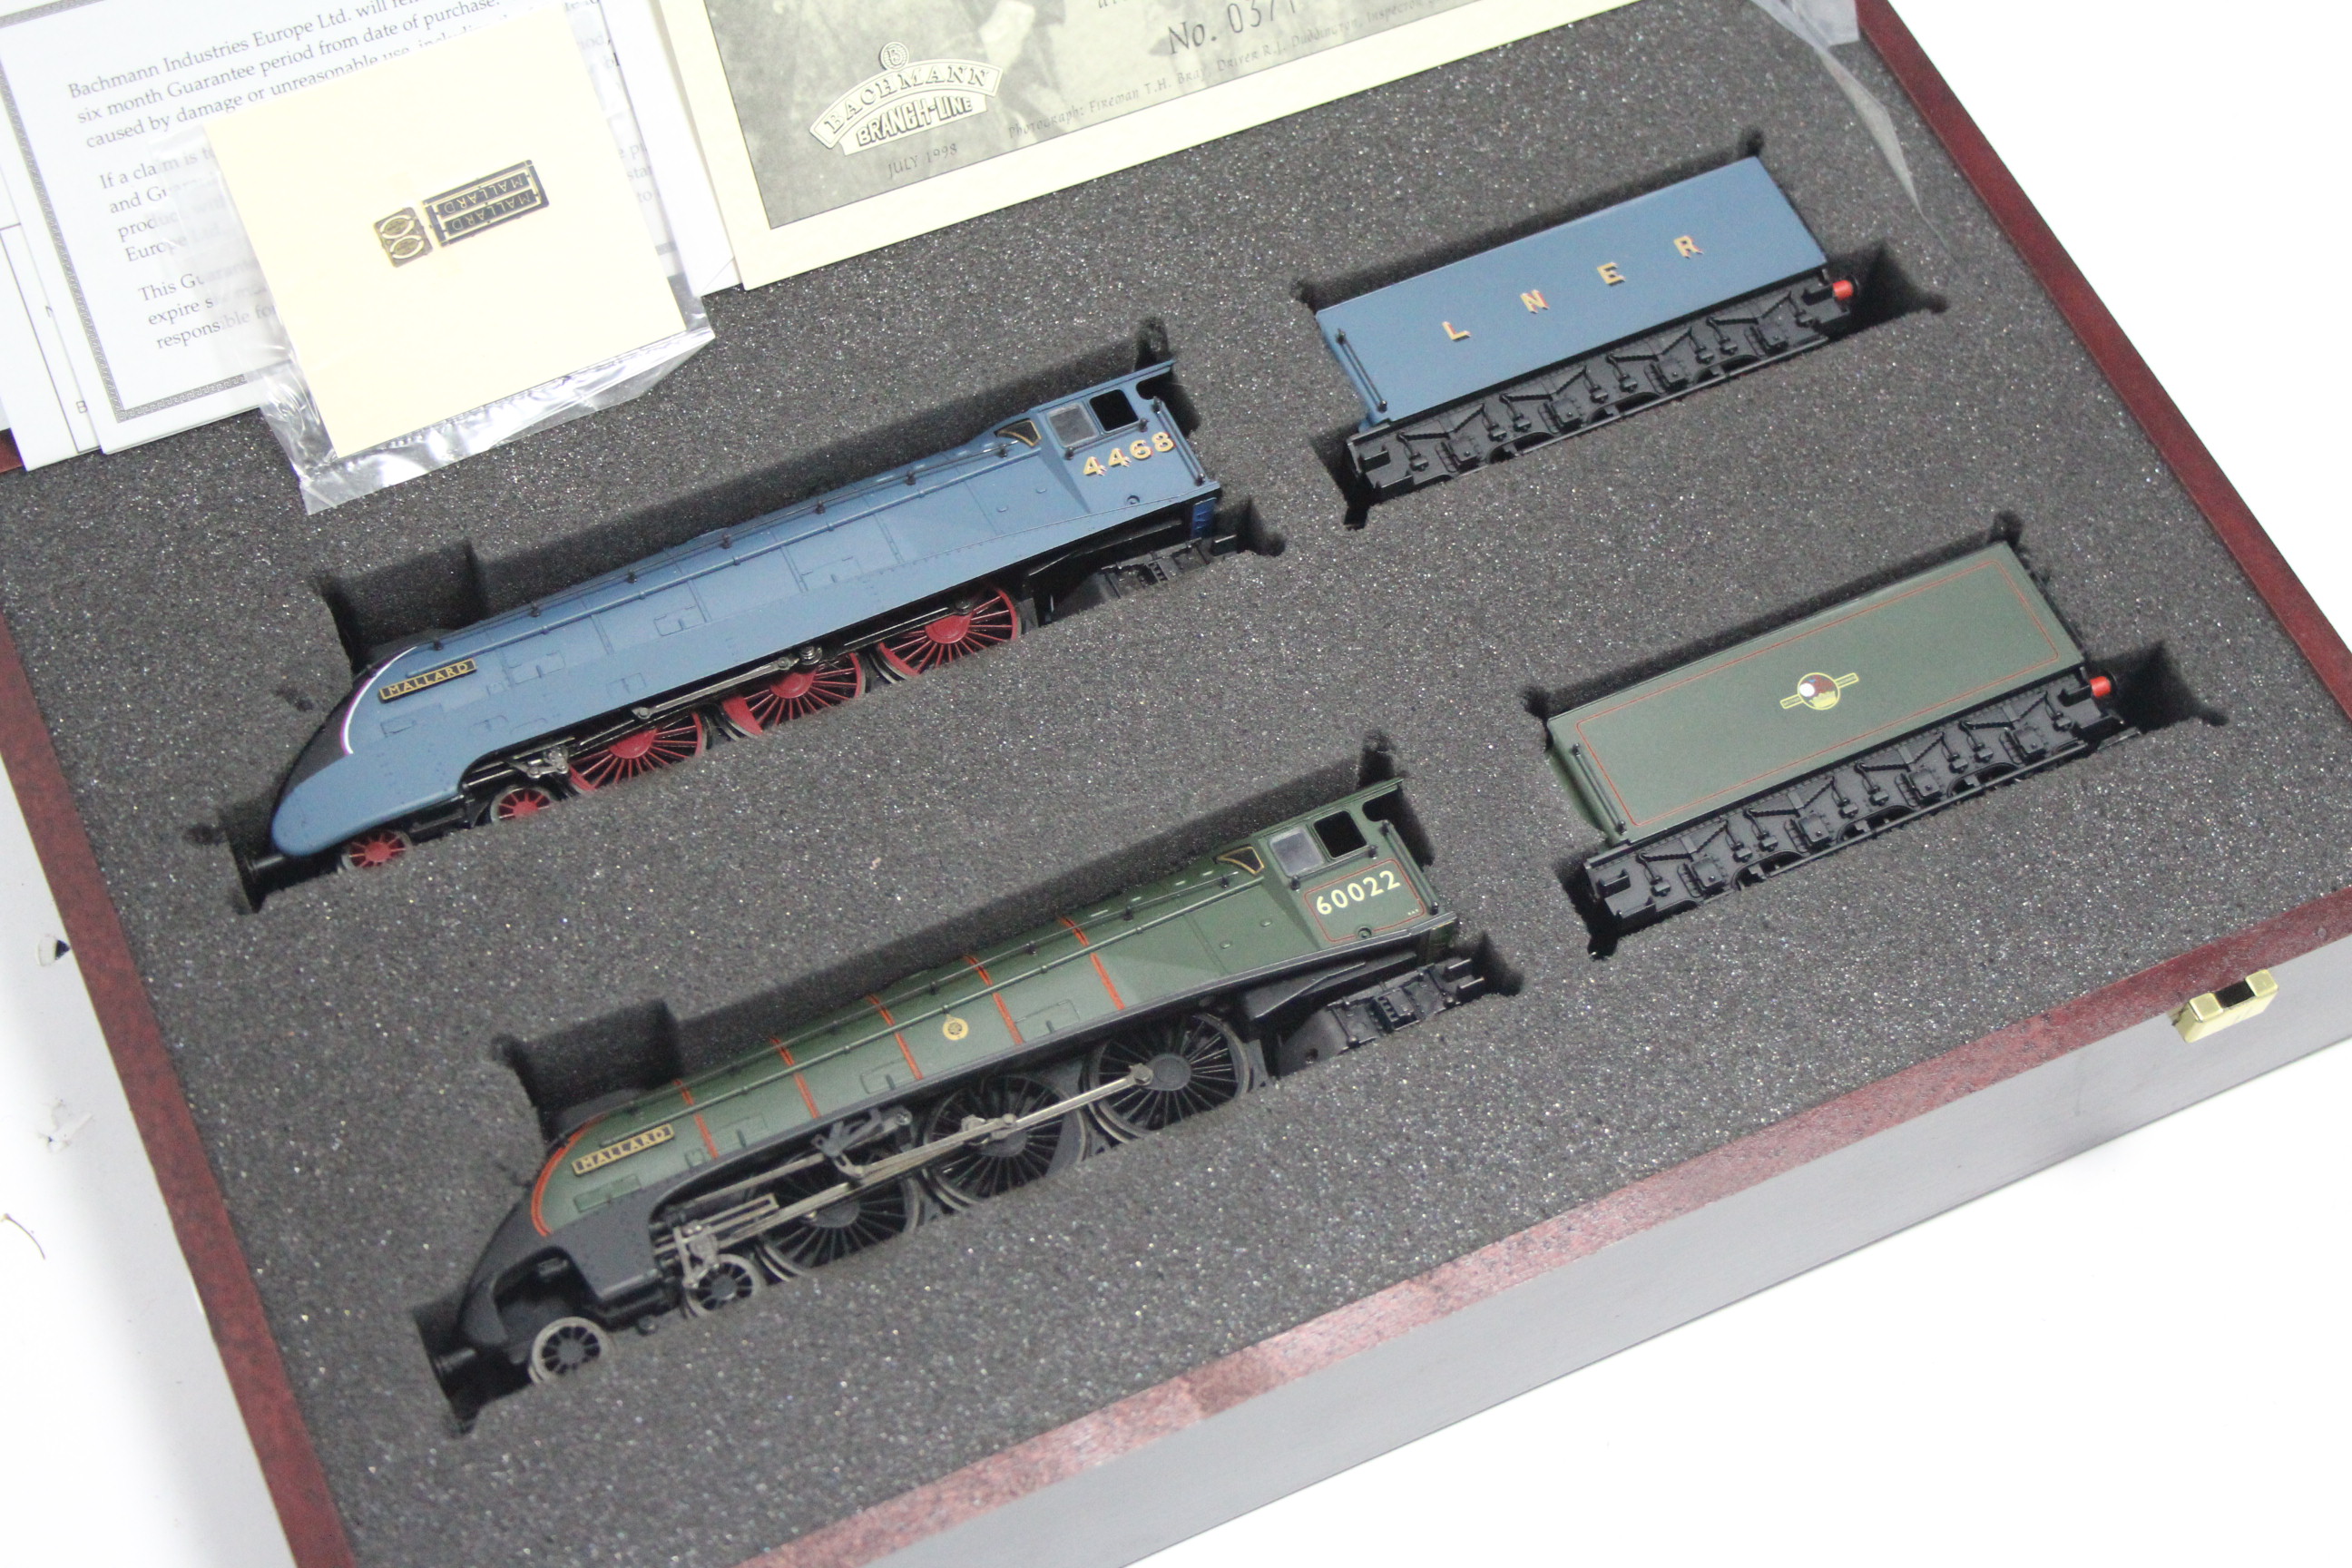 A Bachmann Branch-Line Limited Edition “Mallard” box set to commemorate the Diamond Jubilee of The